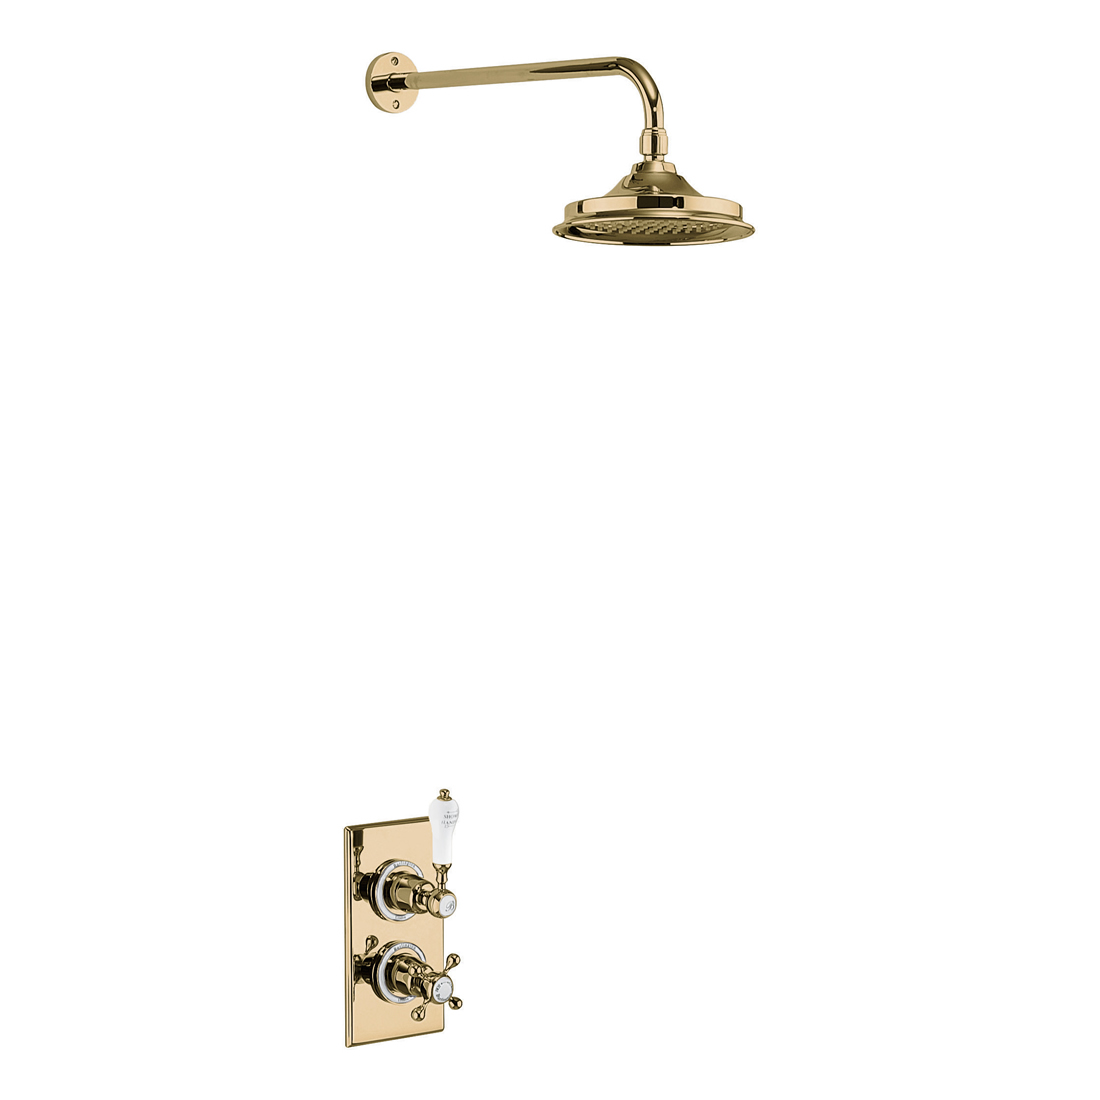 Trent Thermostatic Single Outlet Concealed Shower Valve with Fixed Shower Arm with 9 inch rose - GOLD